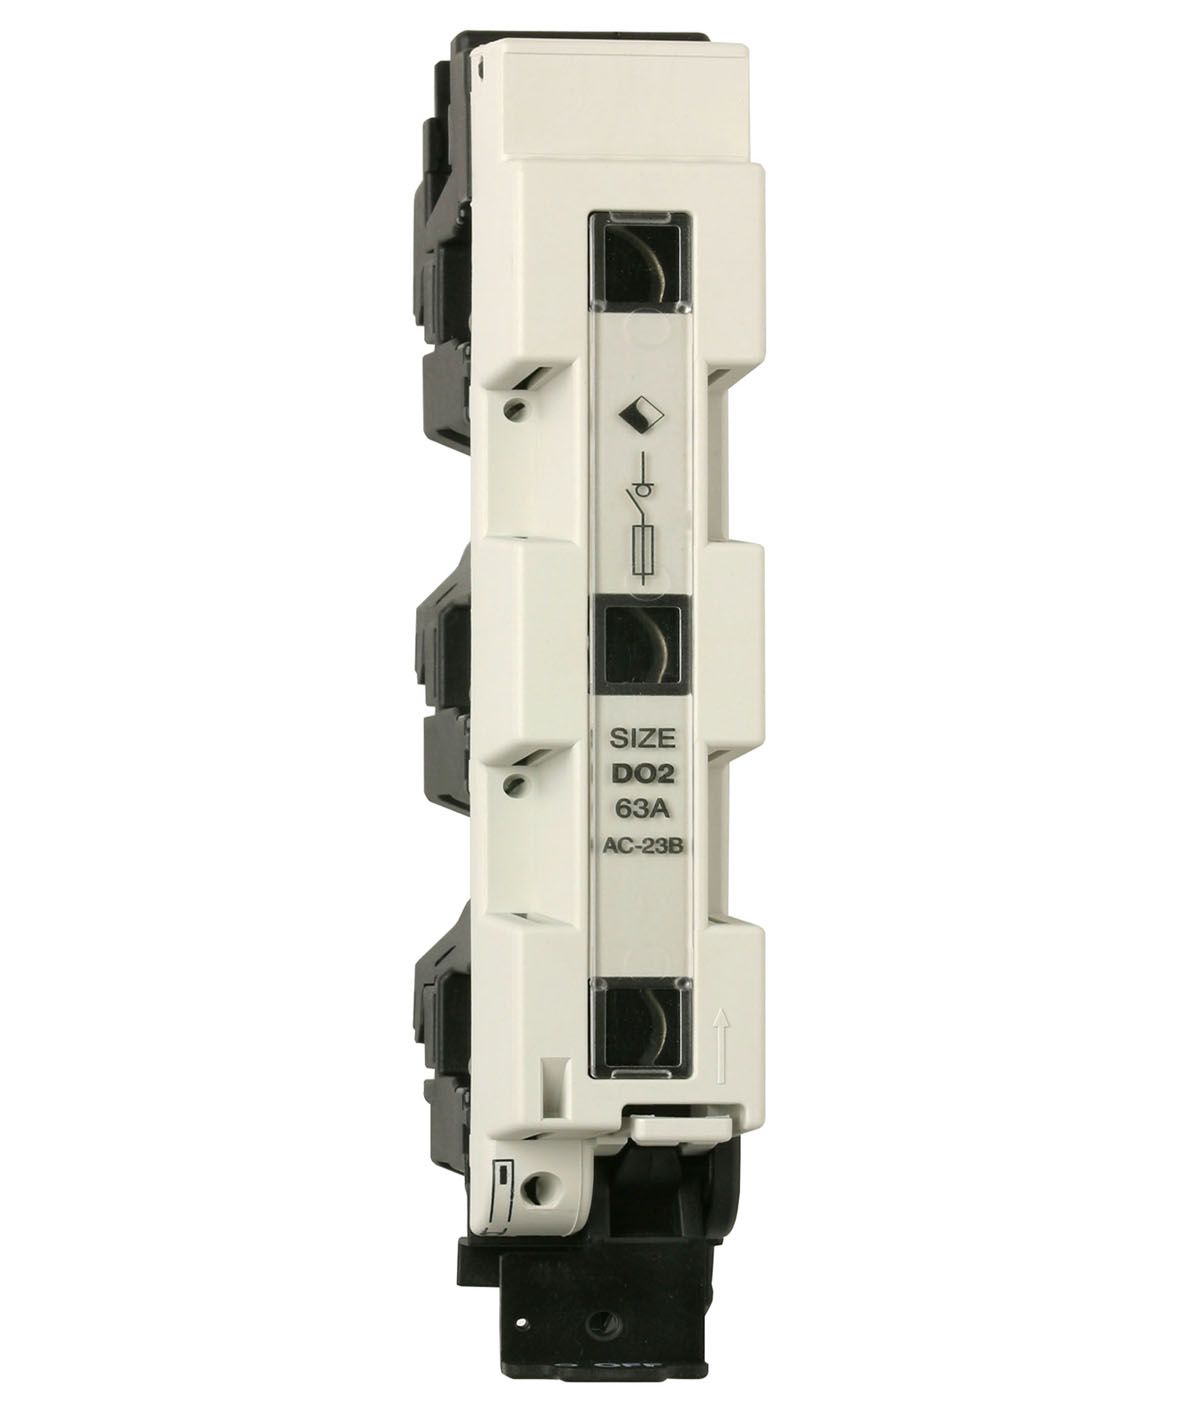 V1026600 - D02-vert. fuse switch disconnector, 63A triple pole switching, for MULTIFIX 60